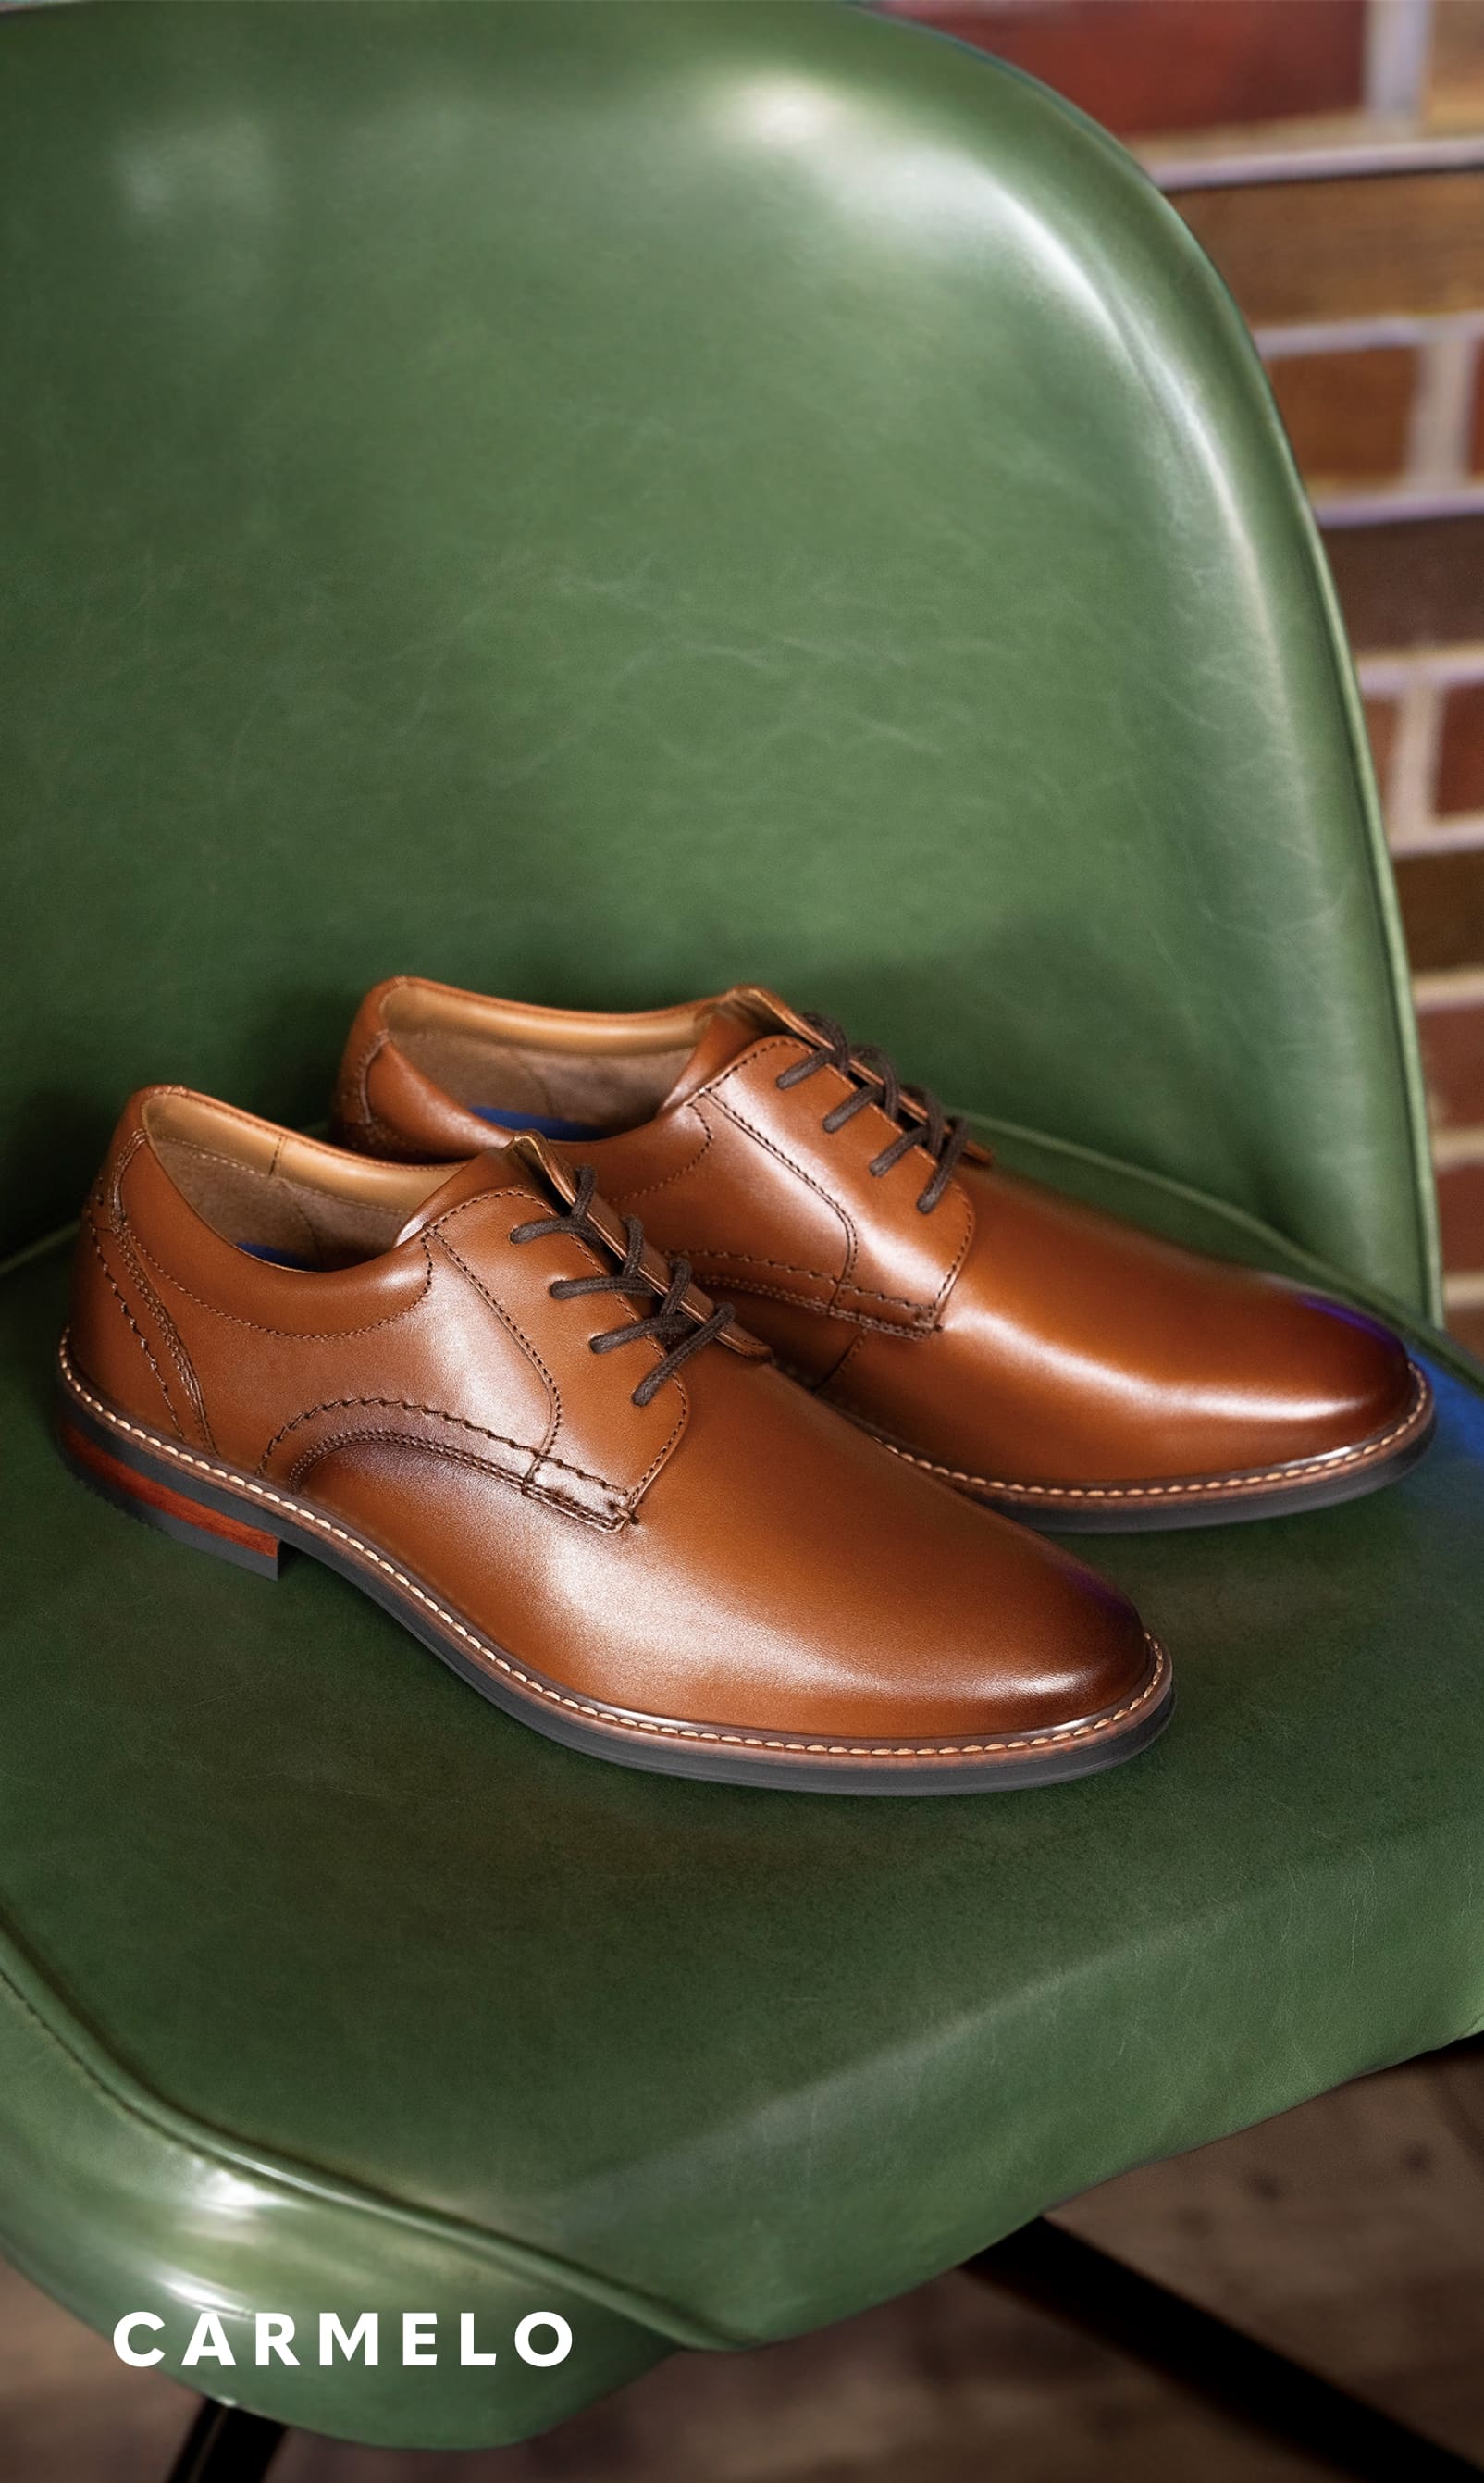 Men's Dress Shoes category. Image features the Carmelo in cognac. 